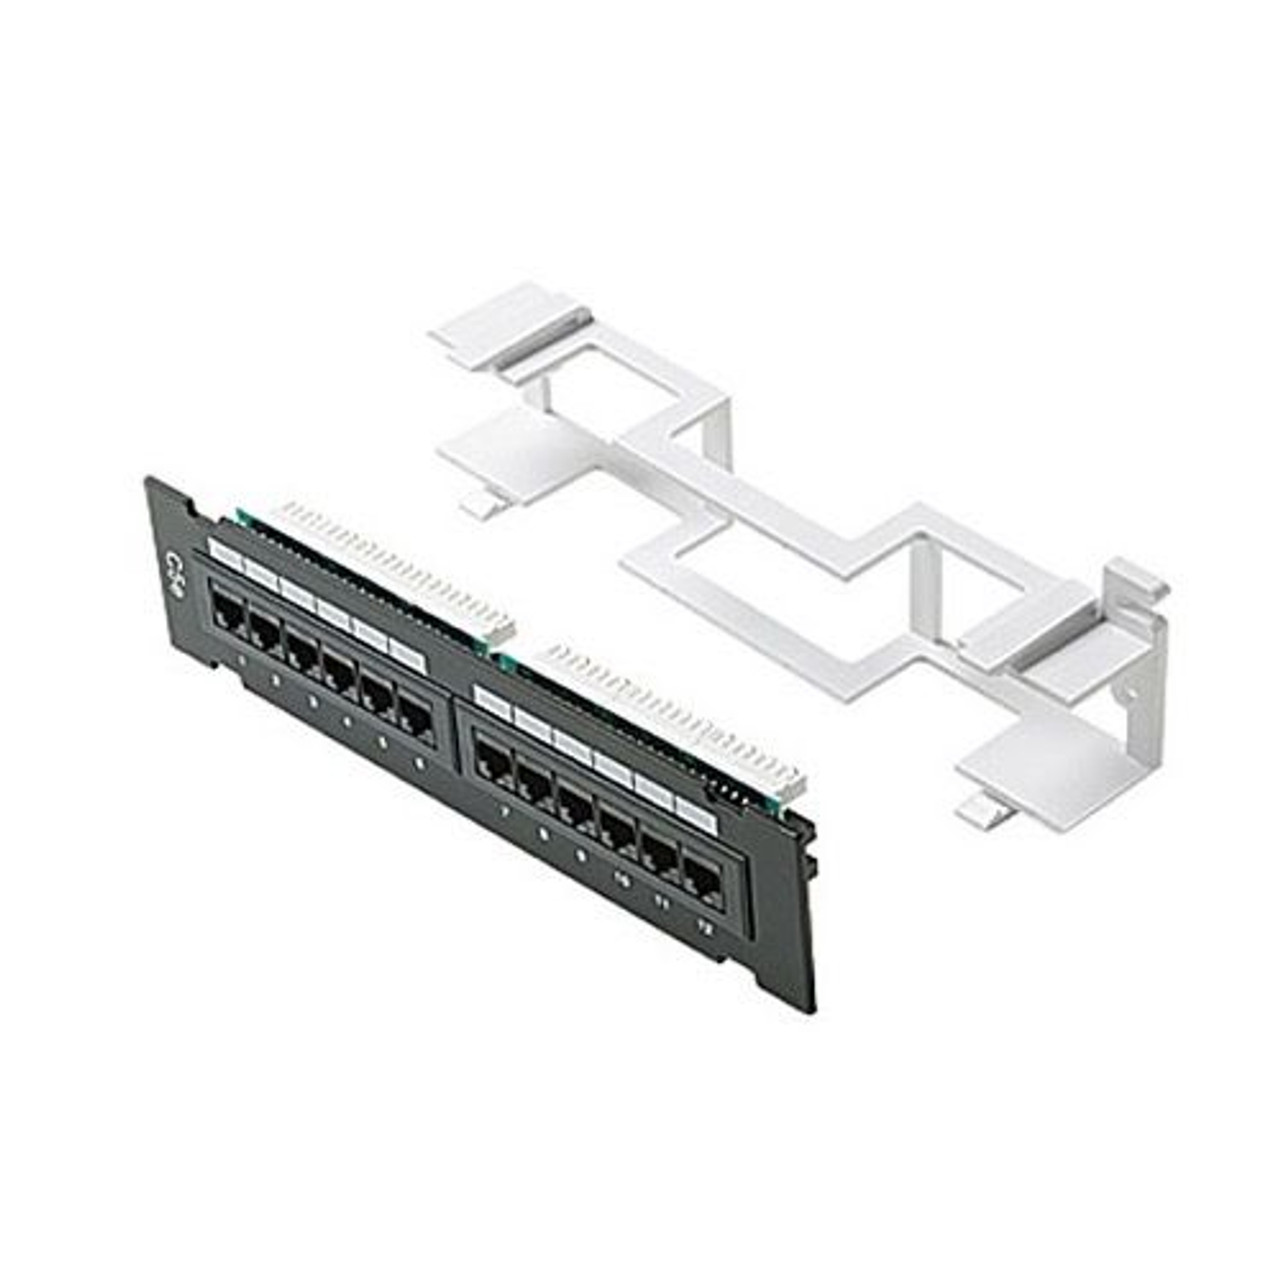 Steren 310-320 12 Port CAT5E Network Mini Patch Panel 12 x RJ45 110-IDC 22 - 26 AWG 9 7/8" W x 2 1/4" H x 1 1/14" D with Mounting Bracket Fast Media RJ-45 CAT-5E Patch Panel Commercial Grade